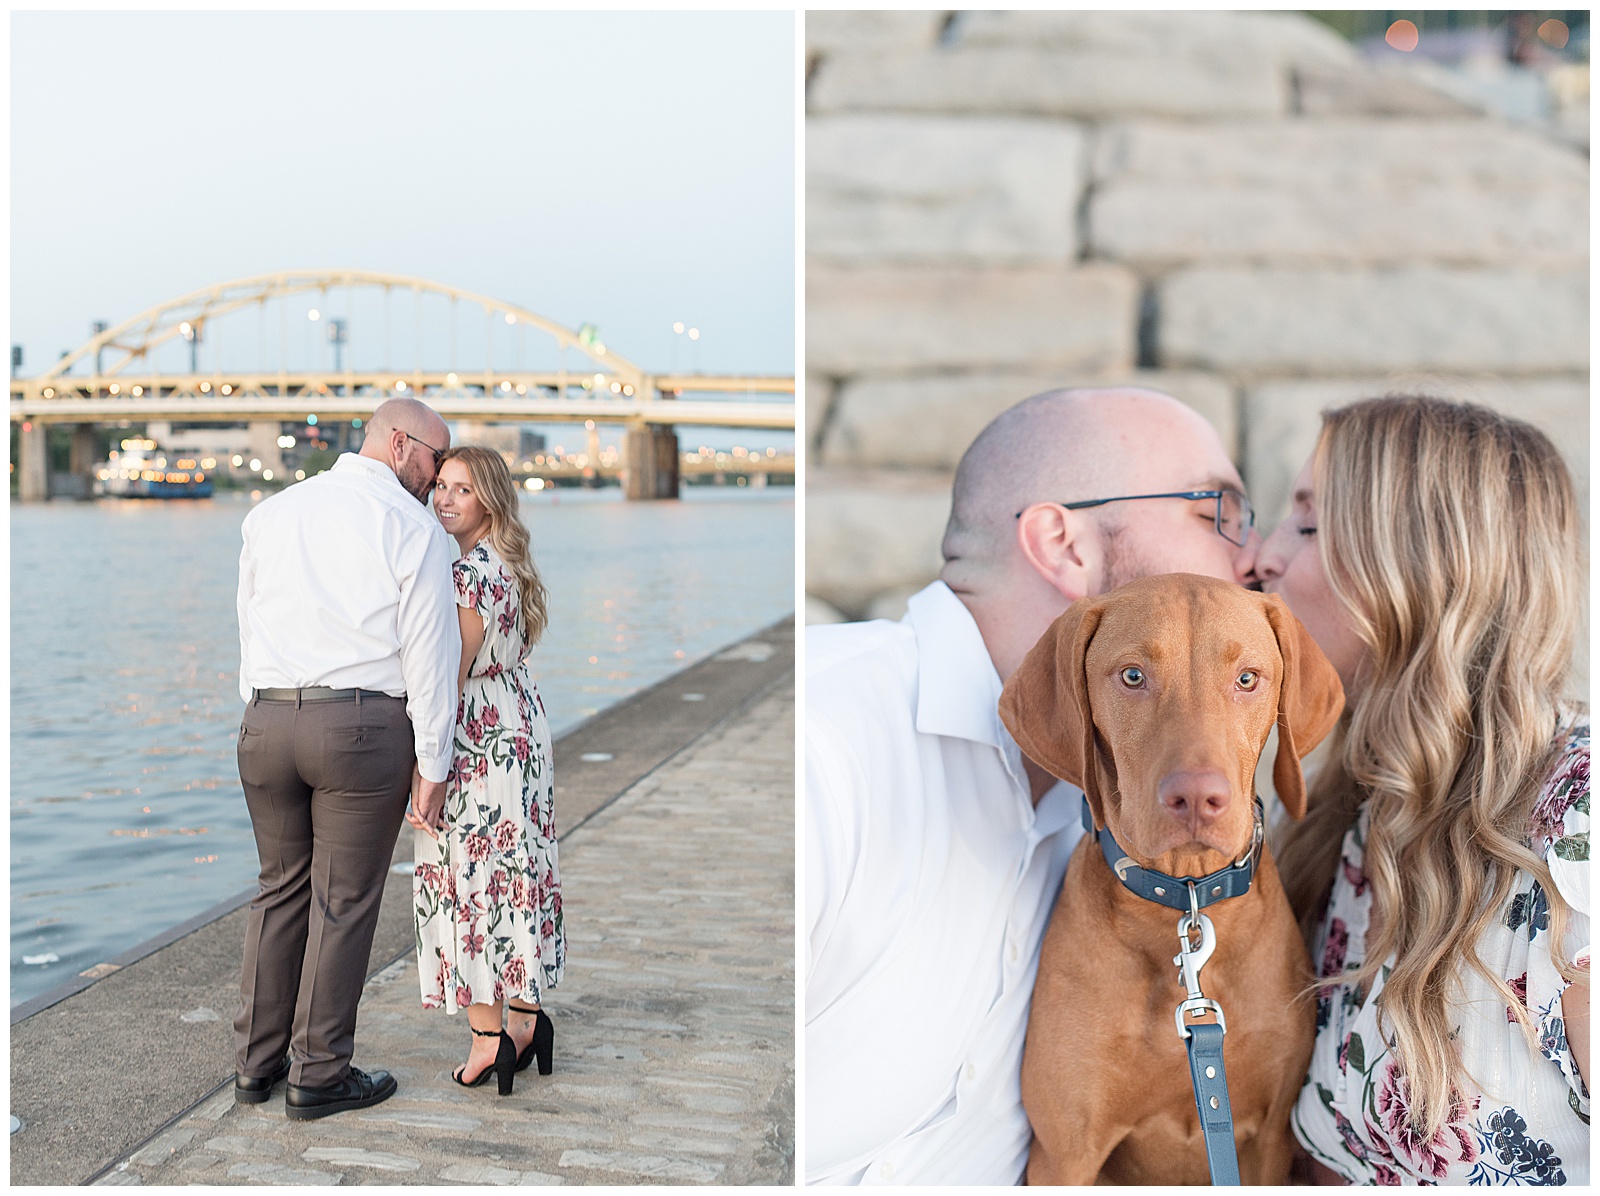 the couple is walking along a river on a concrete walkway with their backs to the camera and the guy is on the left and kissing the girl's right forehead as the girl is looking back at the camera behind her with the river and a bridge in the background at sunset in downtown Pittsburgh, a close up photo of the couple's dog looking right at the camera as the couple is kissing closely behind the dog with a gray stone wall behind them and the guy is on the left and the girl is on the right in downtown Pittsburgh